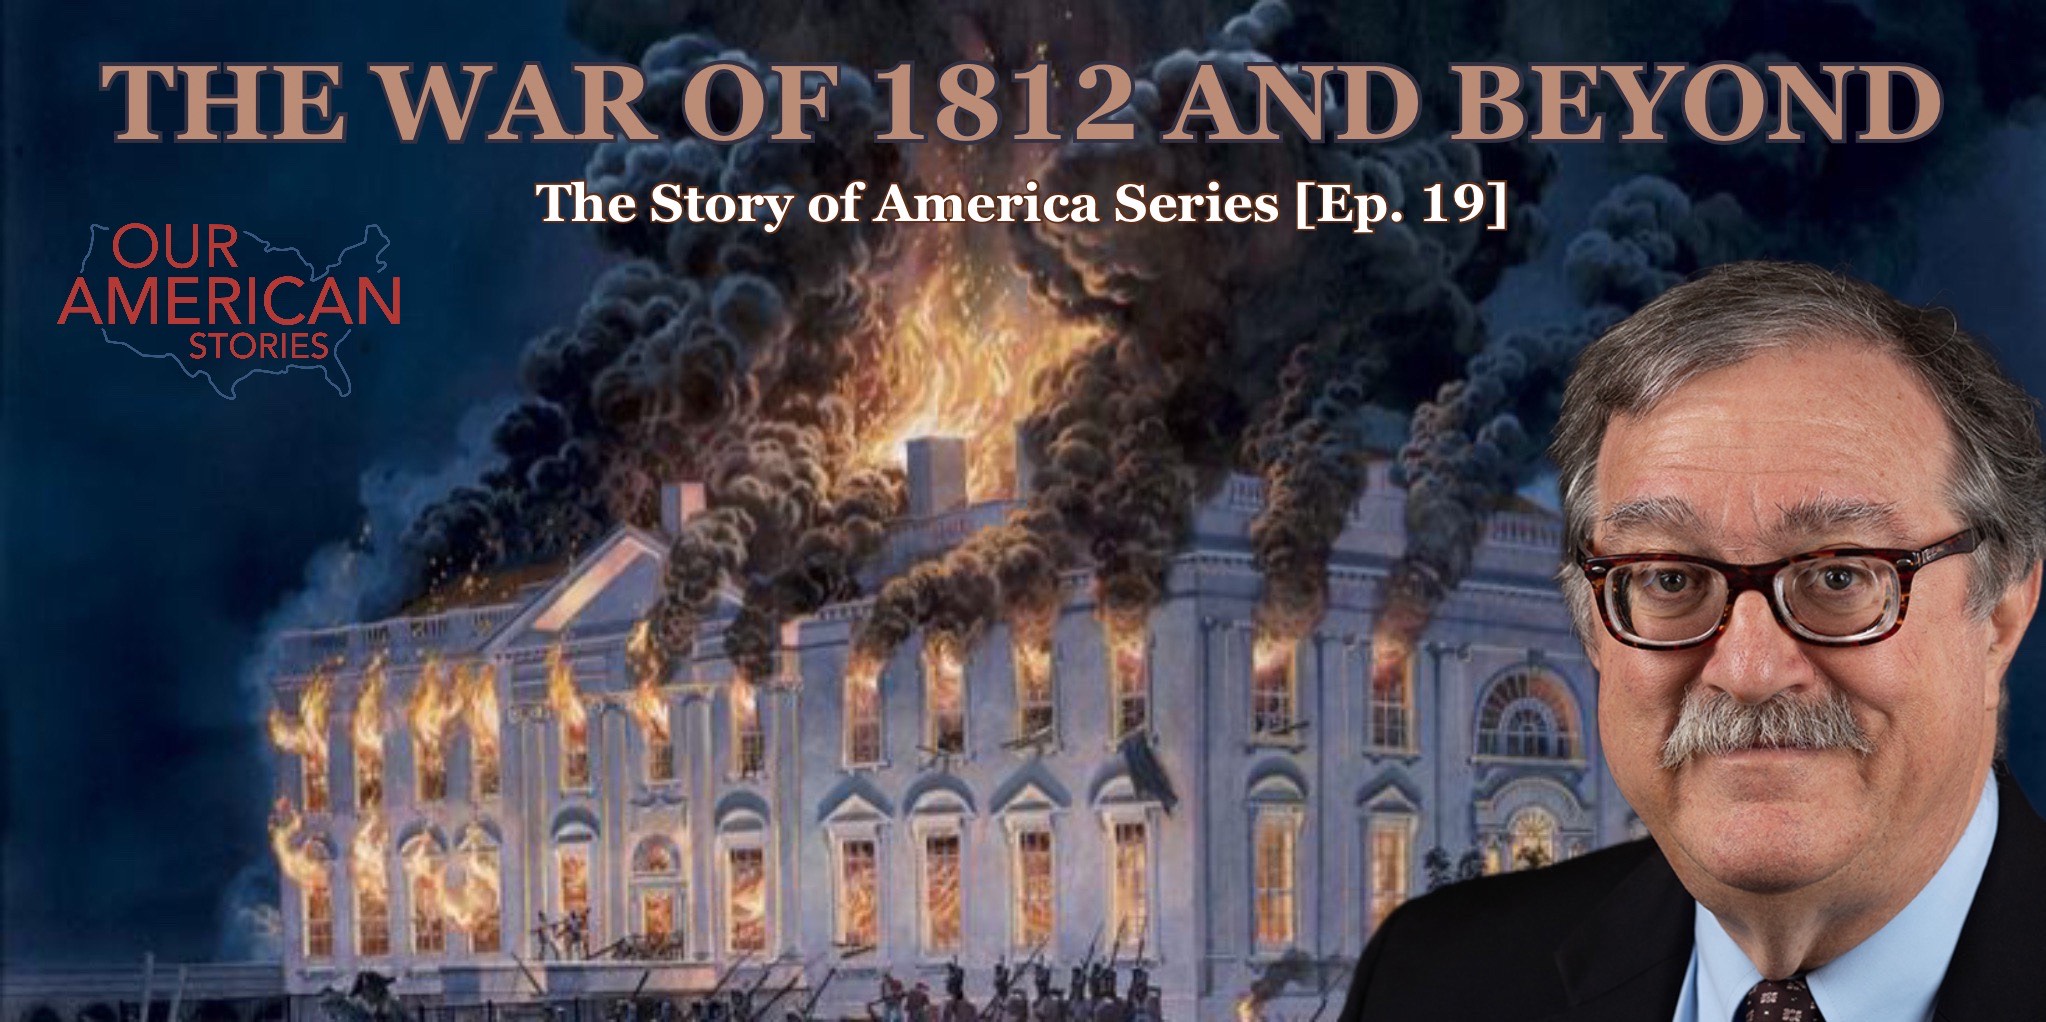 The War of 1812 and Beyond: The Story of America Series [Ep.19]